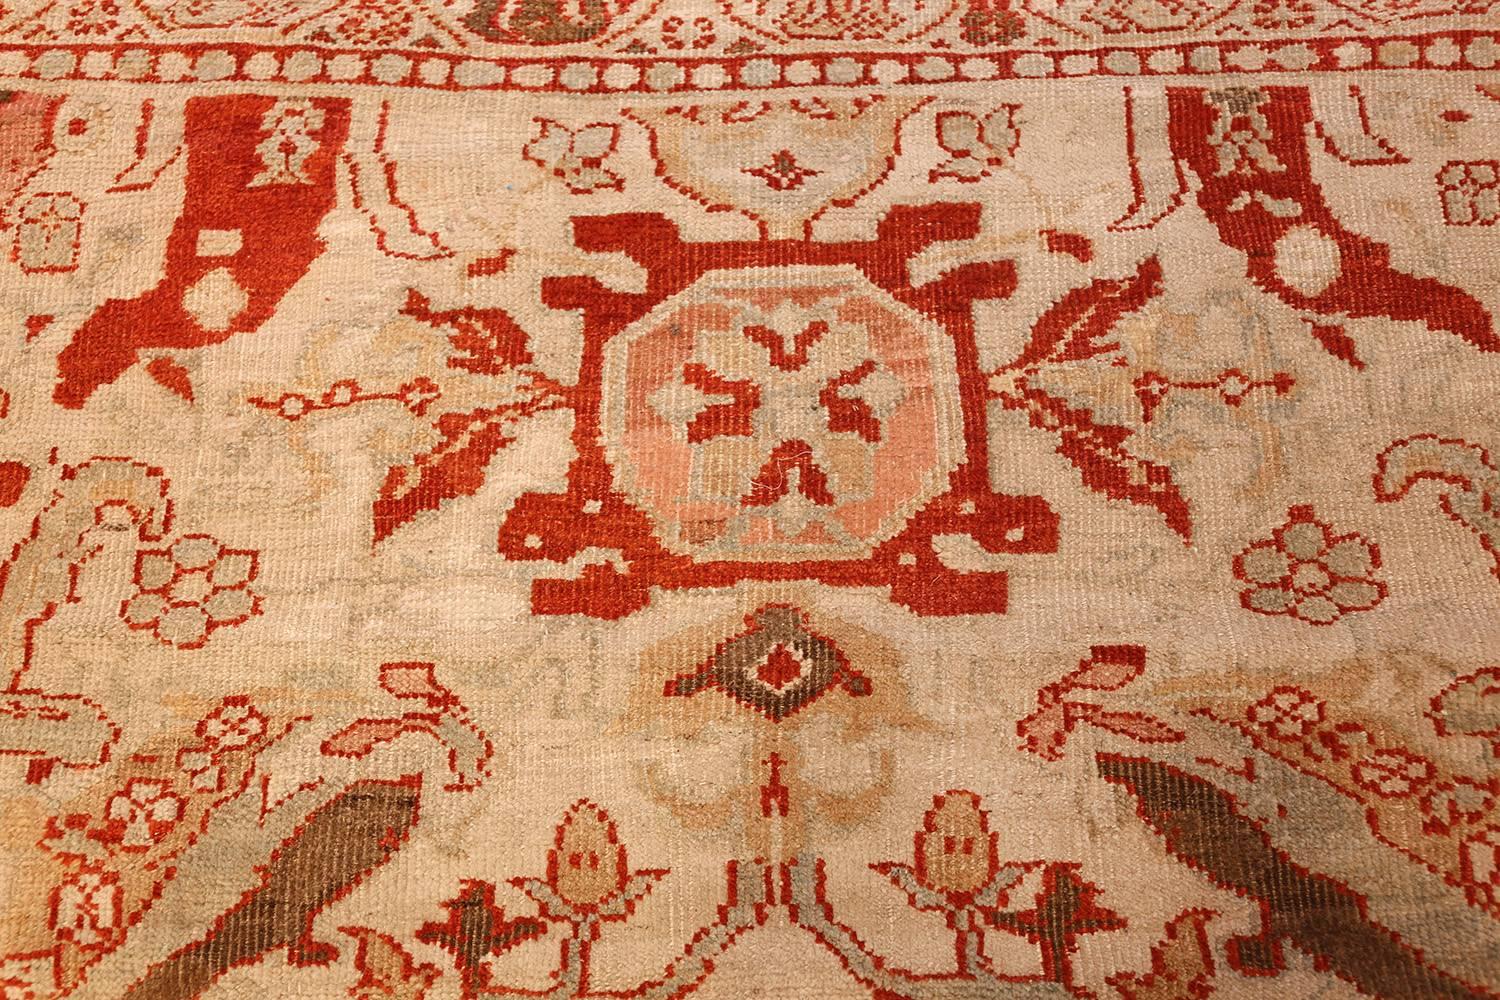 Hand-Knotted Antique Ziegler Sultanabad Persian Rug. 12 ft 4 in x 20 ft  For Sale